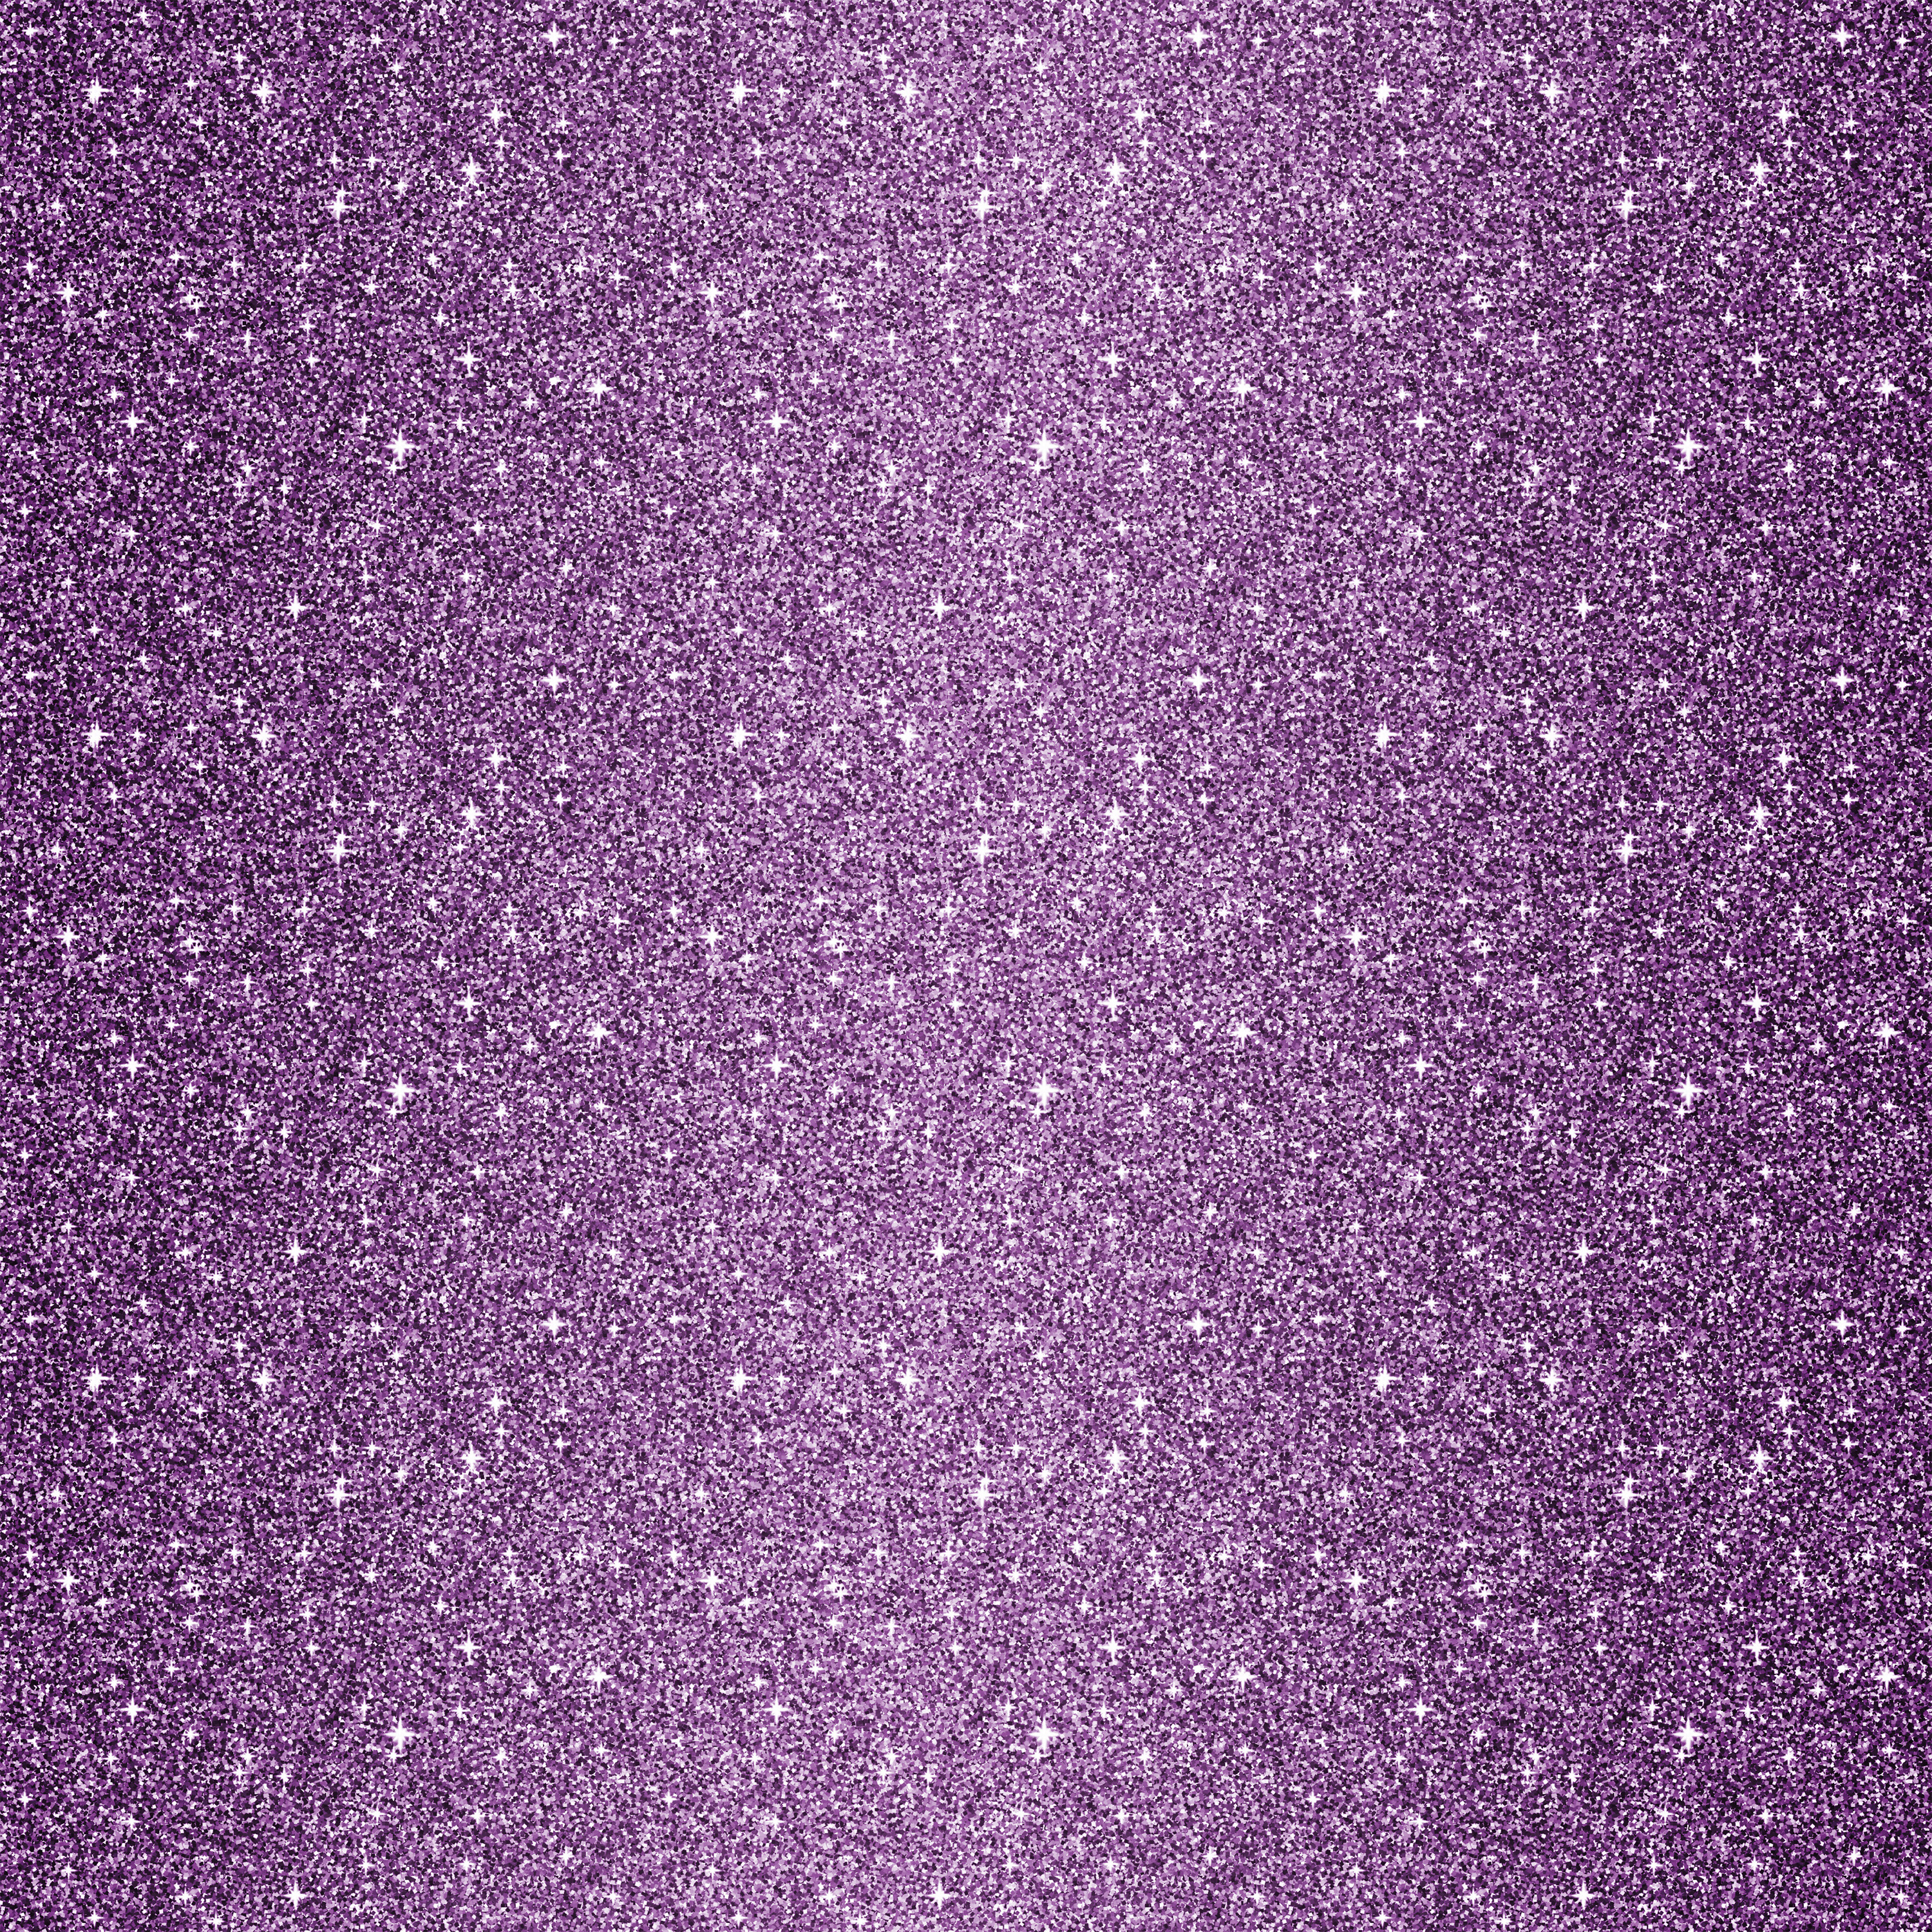 Purple Glitter Background | Gallery Yopriceville - High-Quality Images